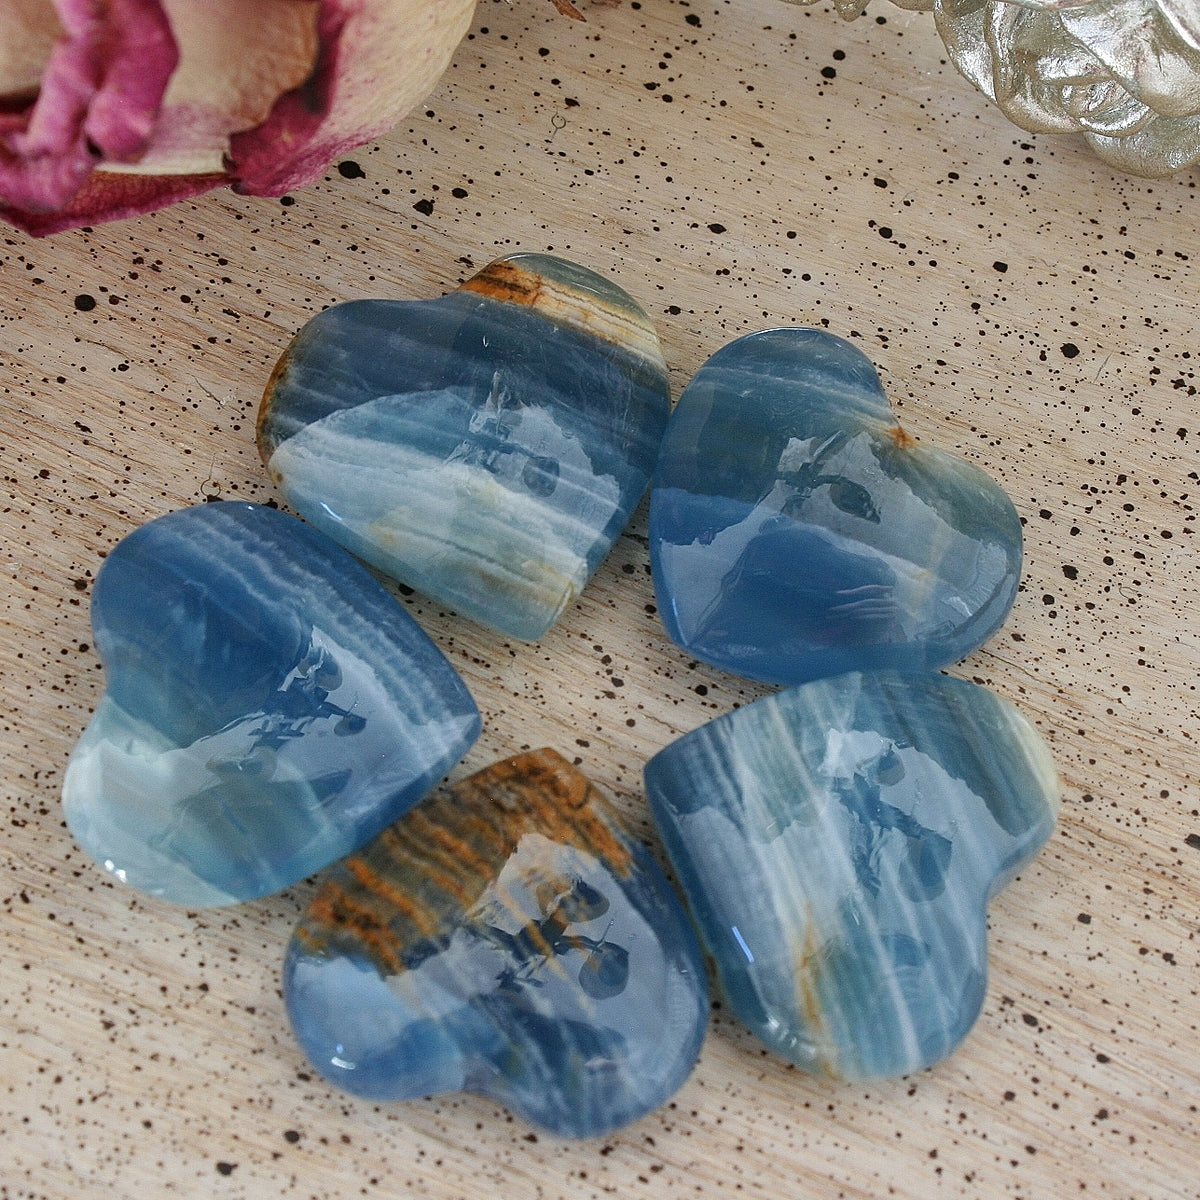 Blue Calcite Heart with Banding from Argentina, also called Blue Onyx or Lemurian Aquatine Calcite A Grade